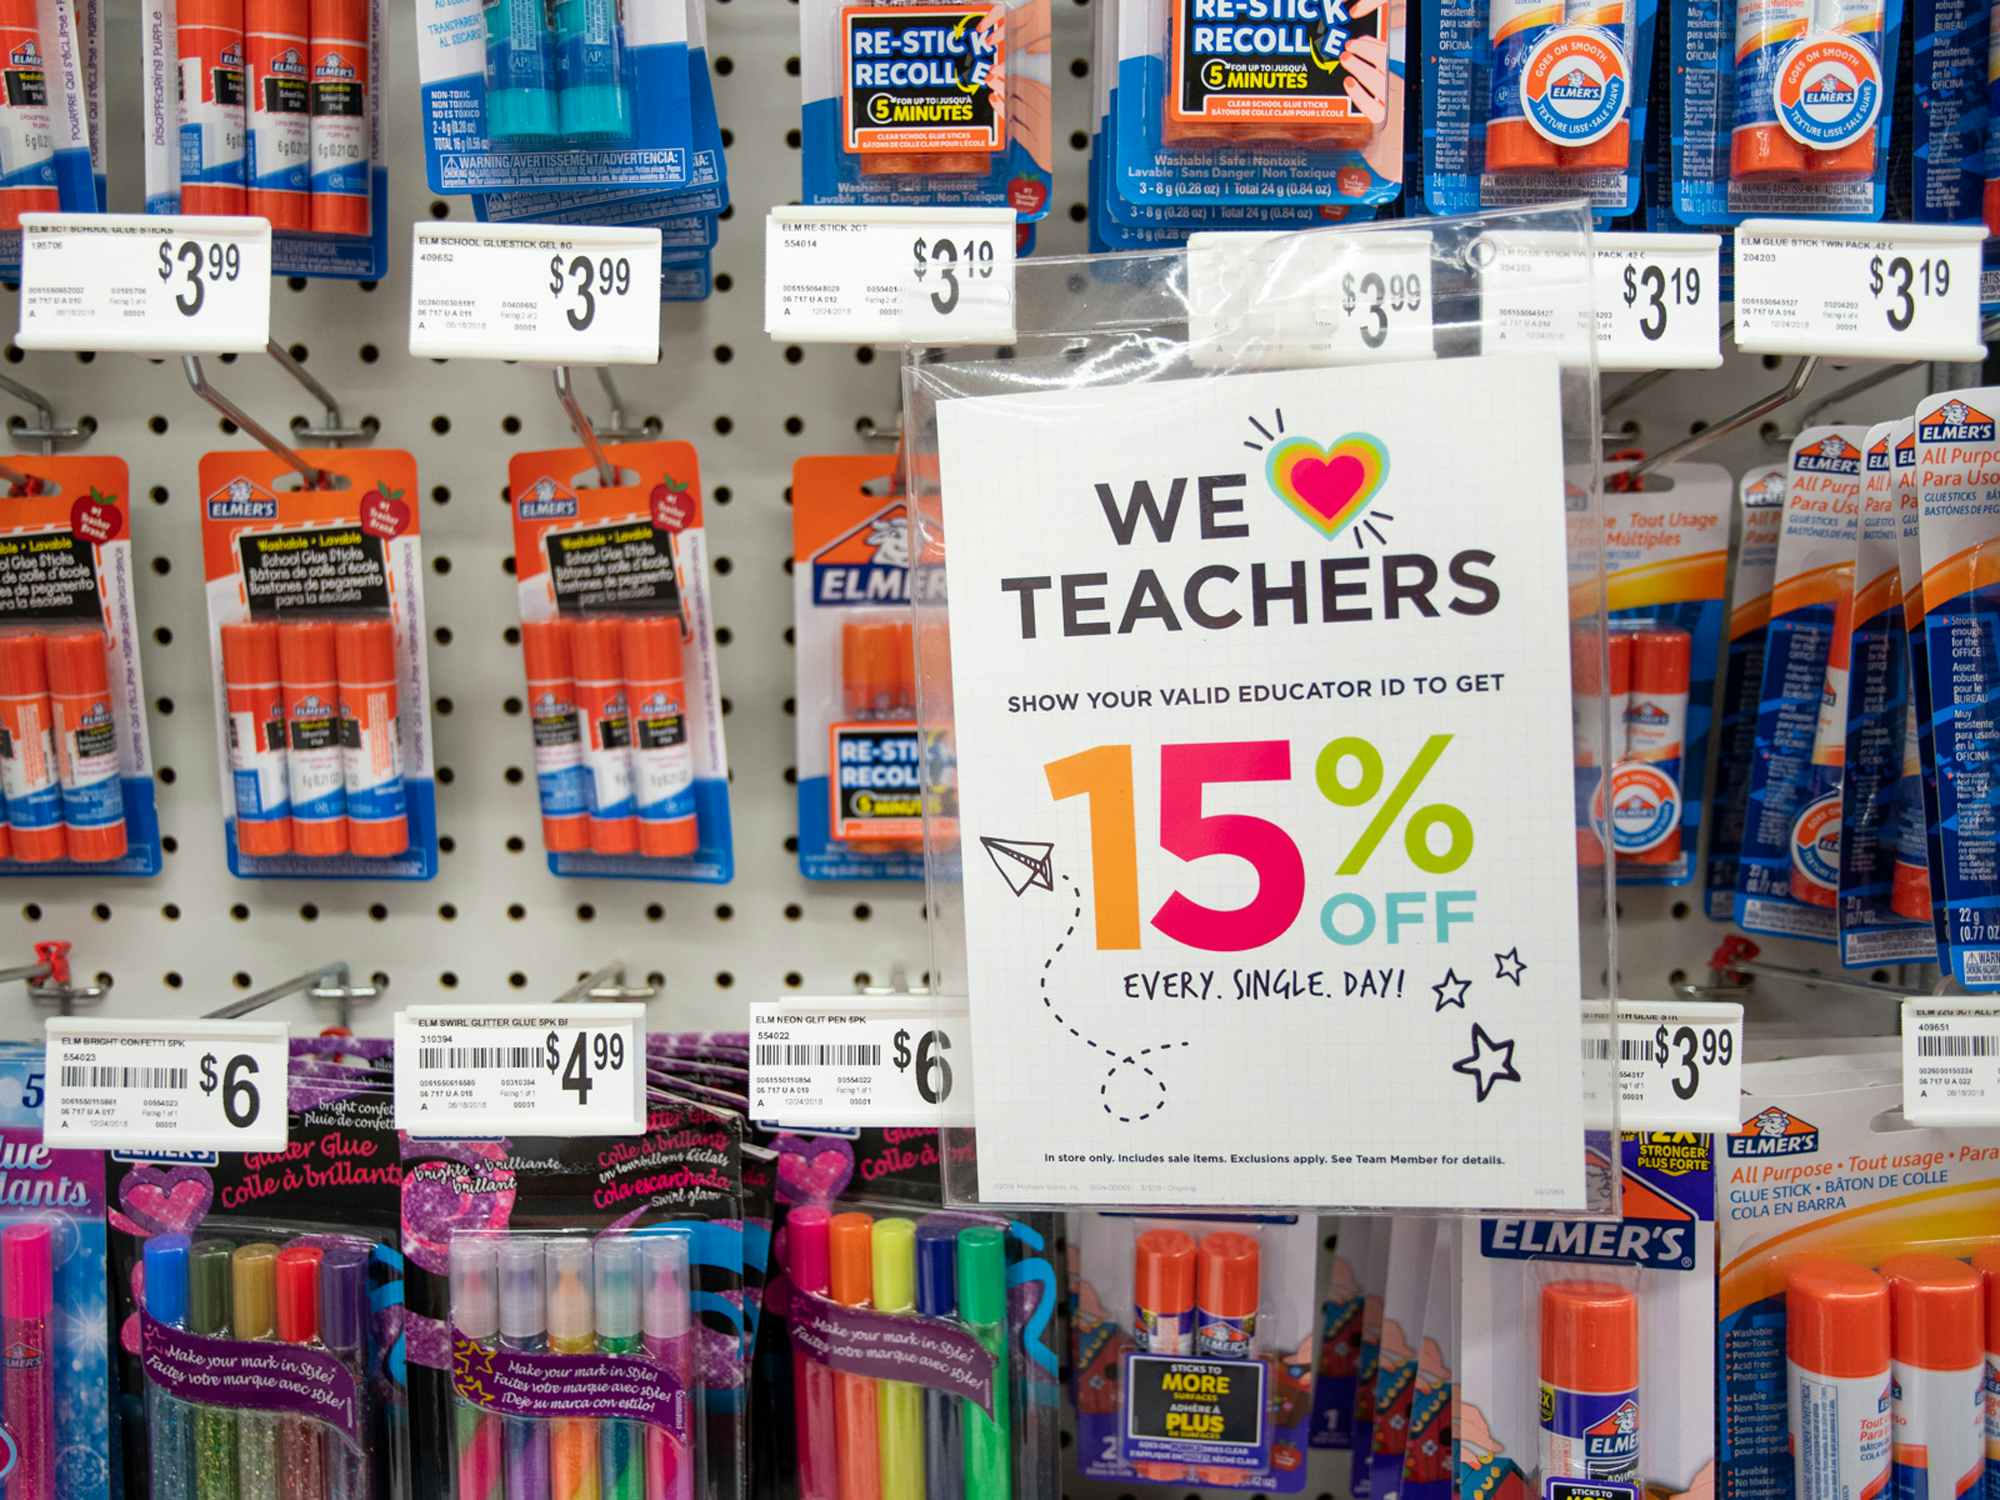 A sign on a wall display at Michaels that says "We love teachers" offering 15% off every day with a valid educator ID.